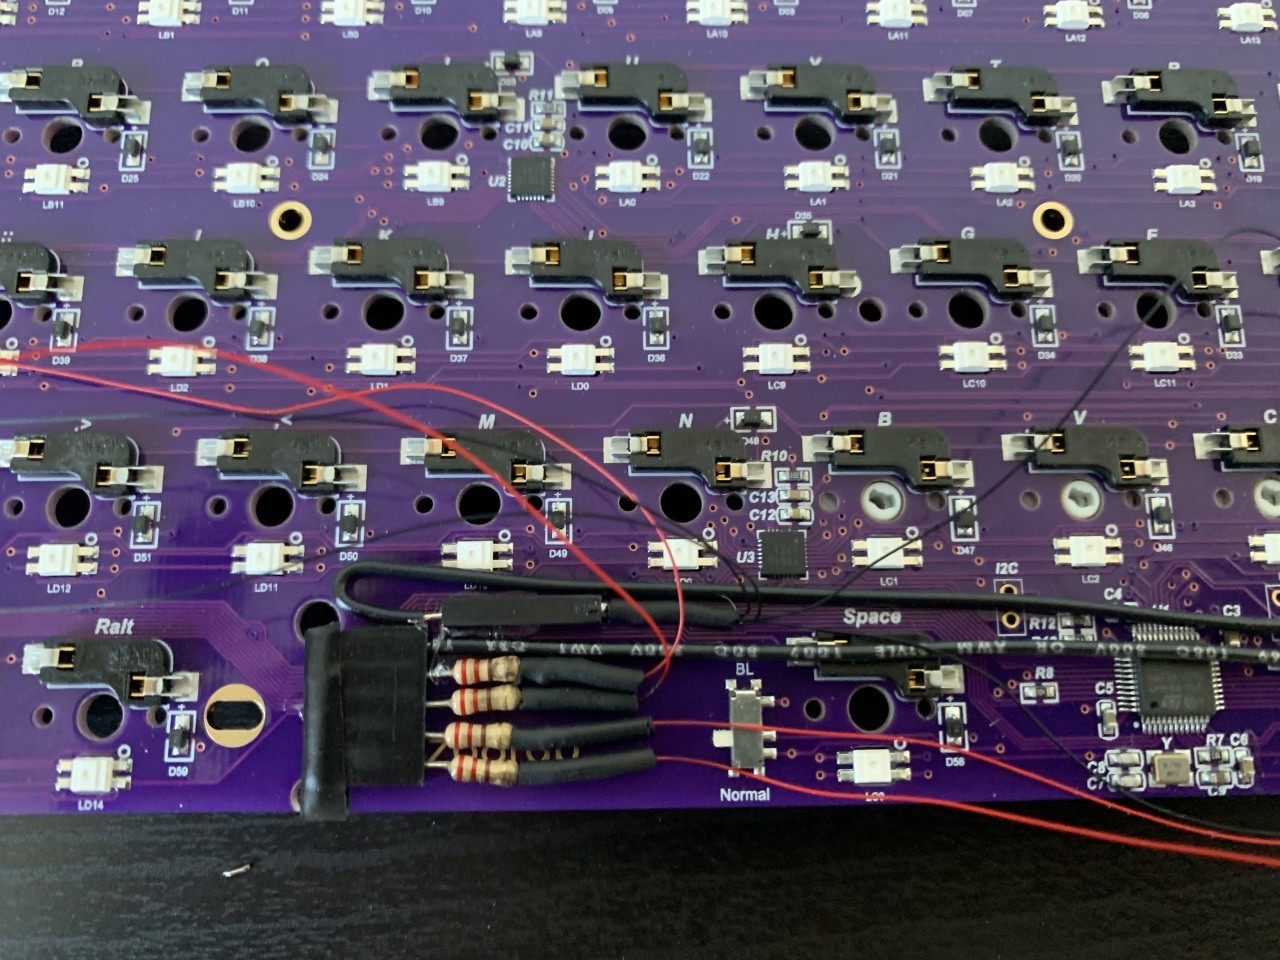 Connectors fit into an empty space on the board with enough room to mount the PCB in the case